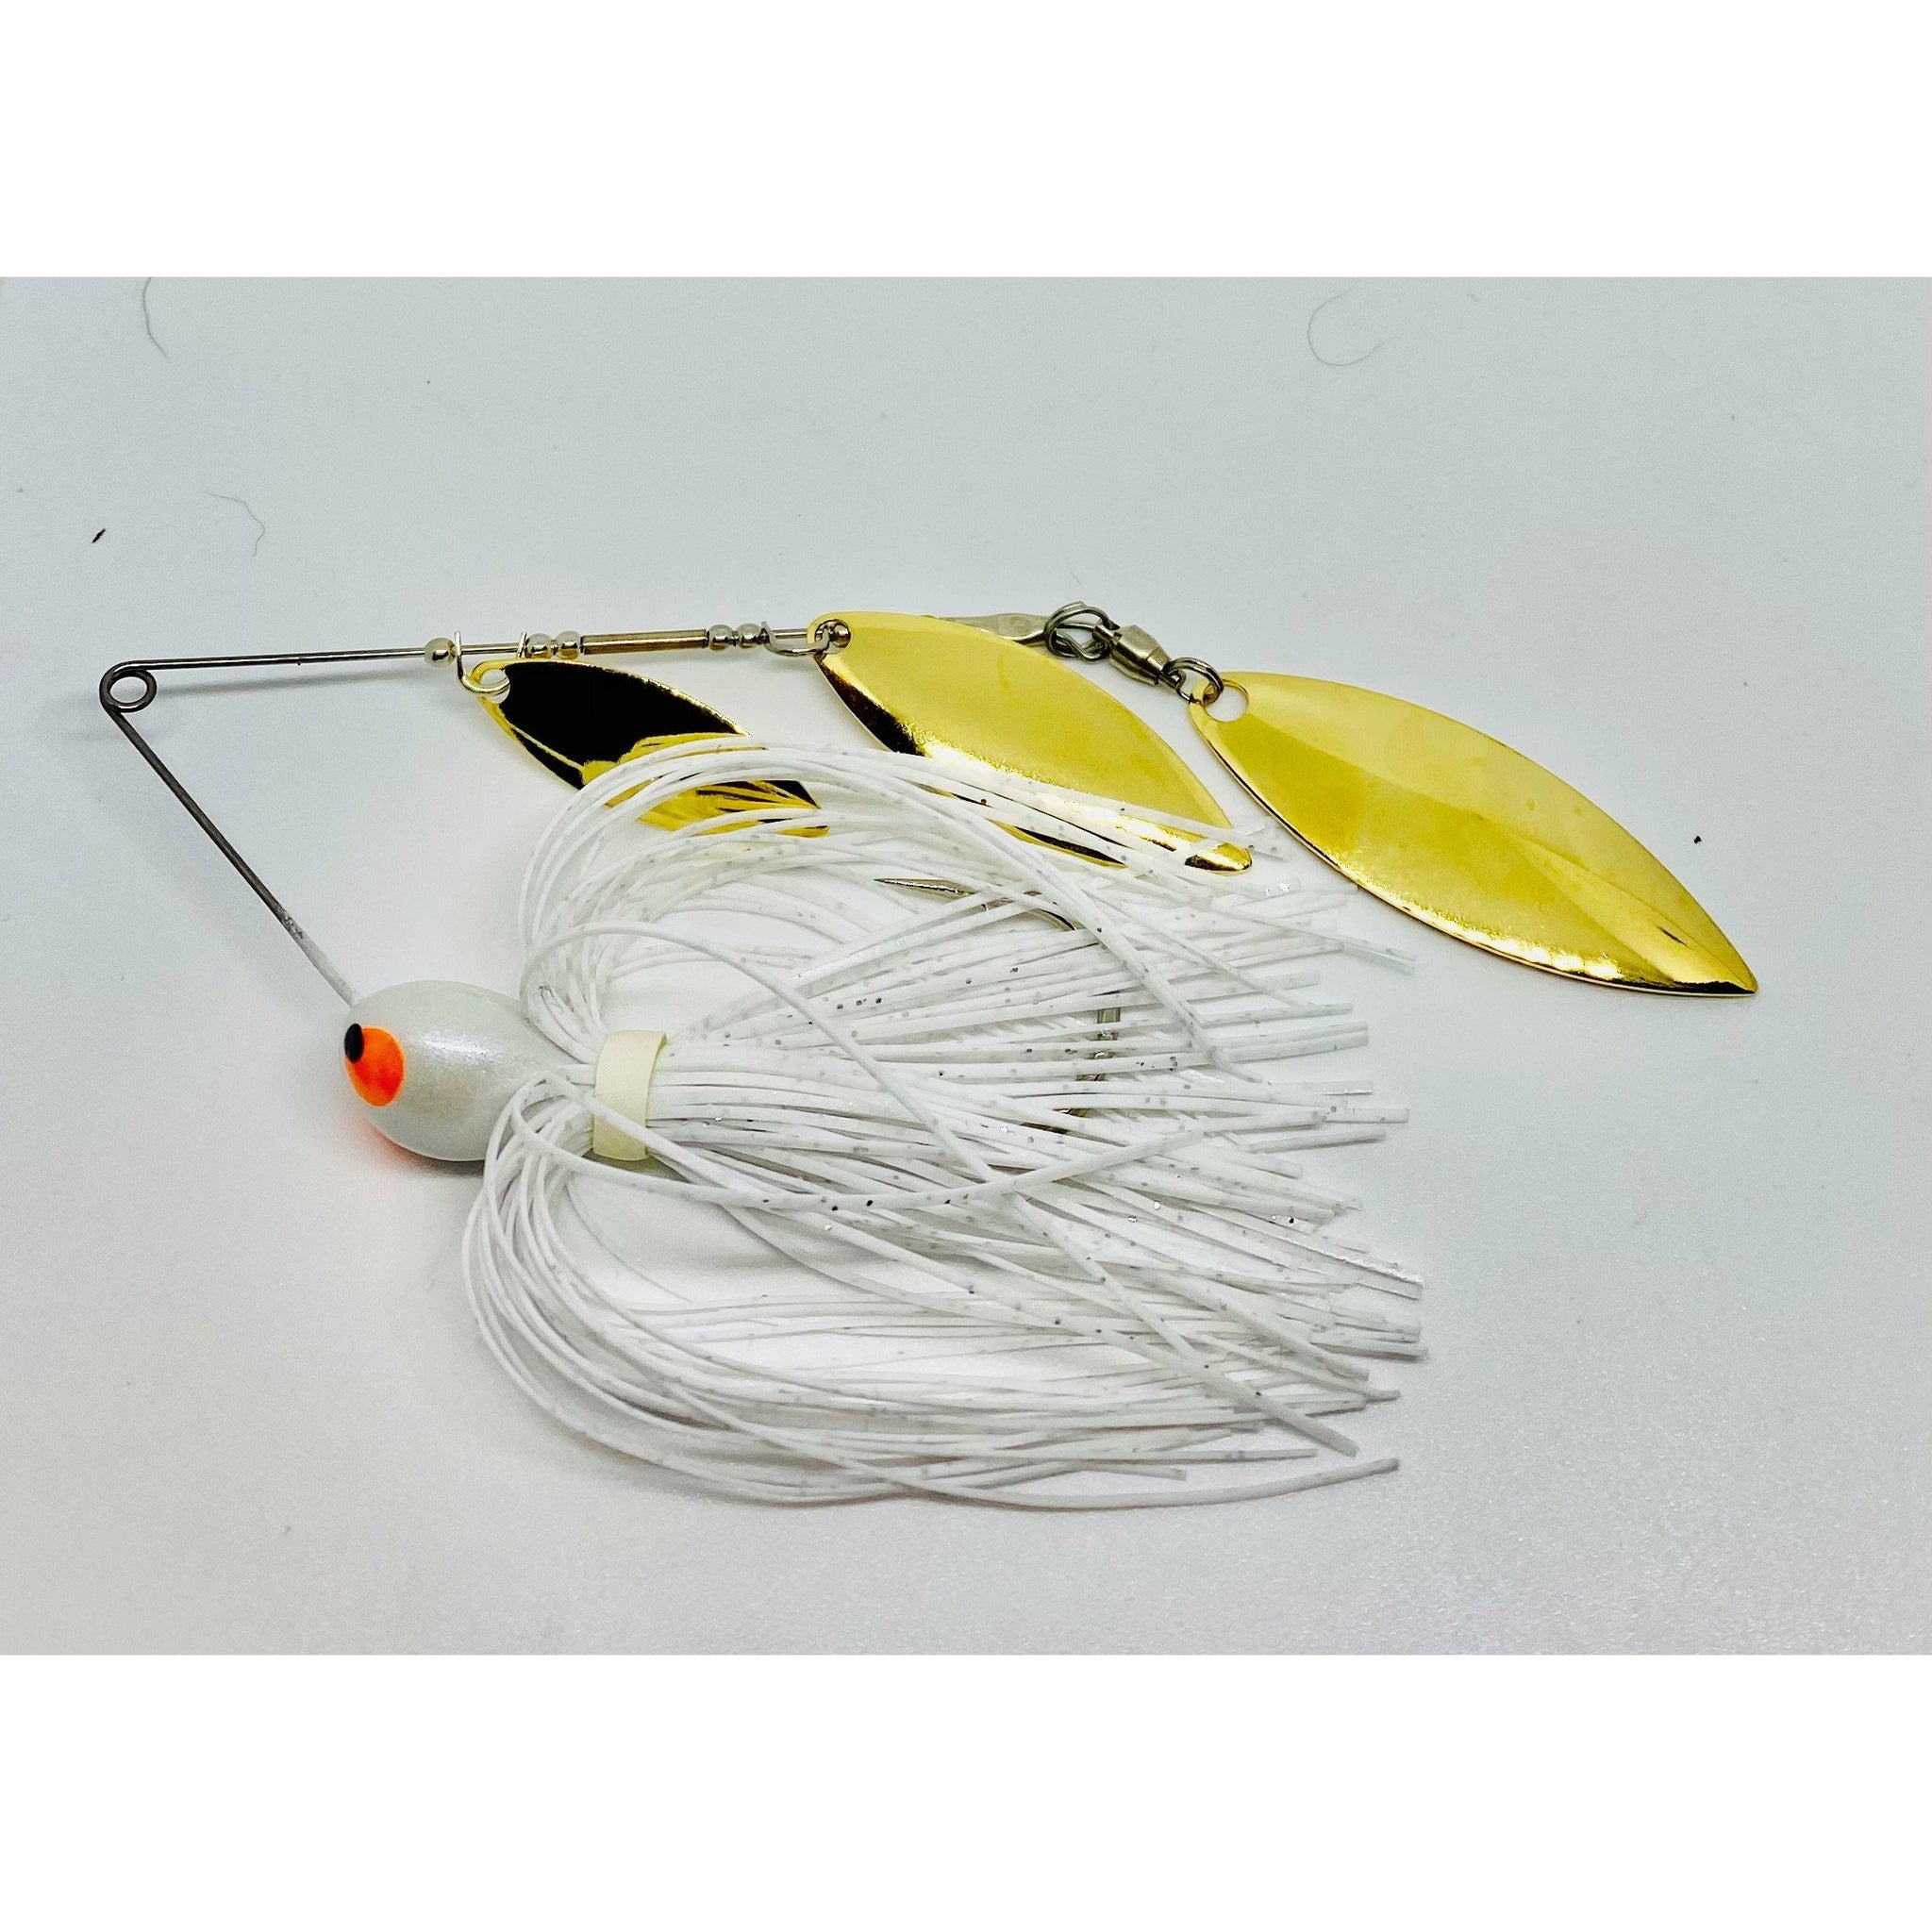 CS-II Double Willow 3/4 Oz Spinnerbait, Nickel Spinner Blades with Trailer,  Trout, Walleye, Pike, or Bass Lures, Fishing Lures for Freshwater or